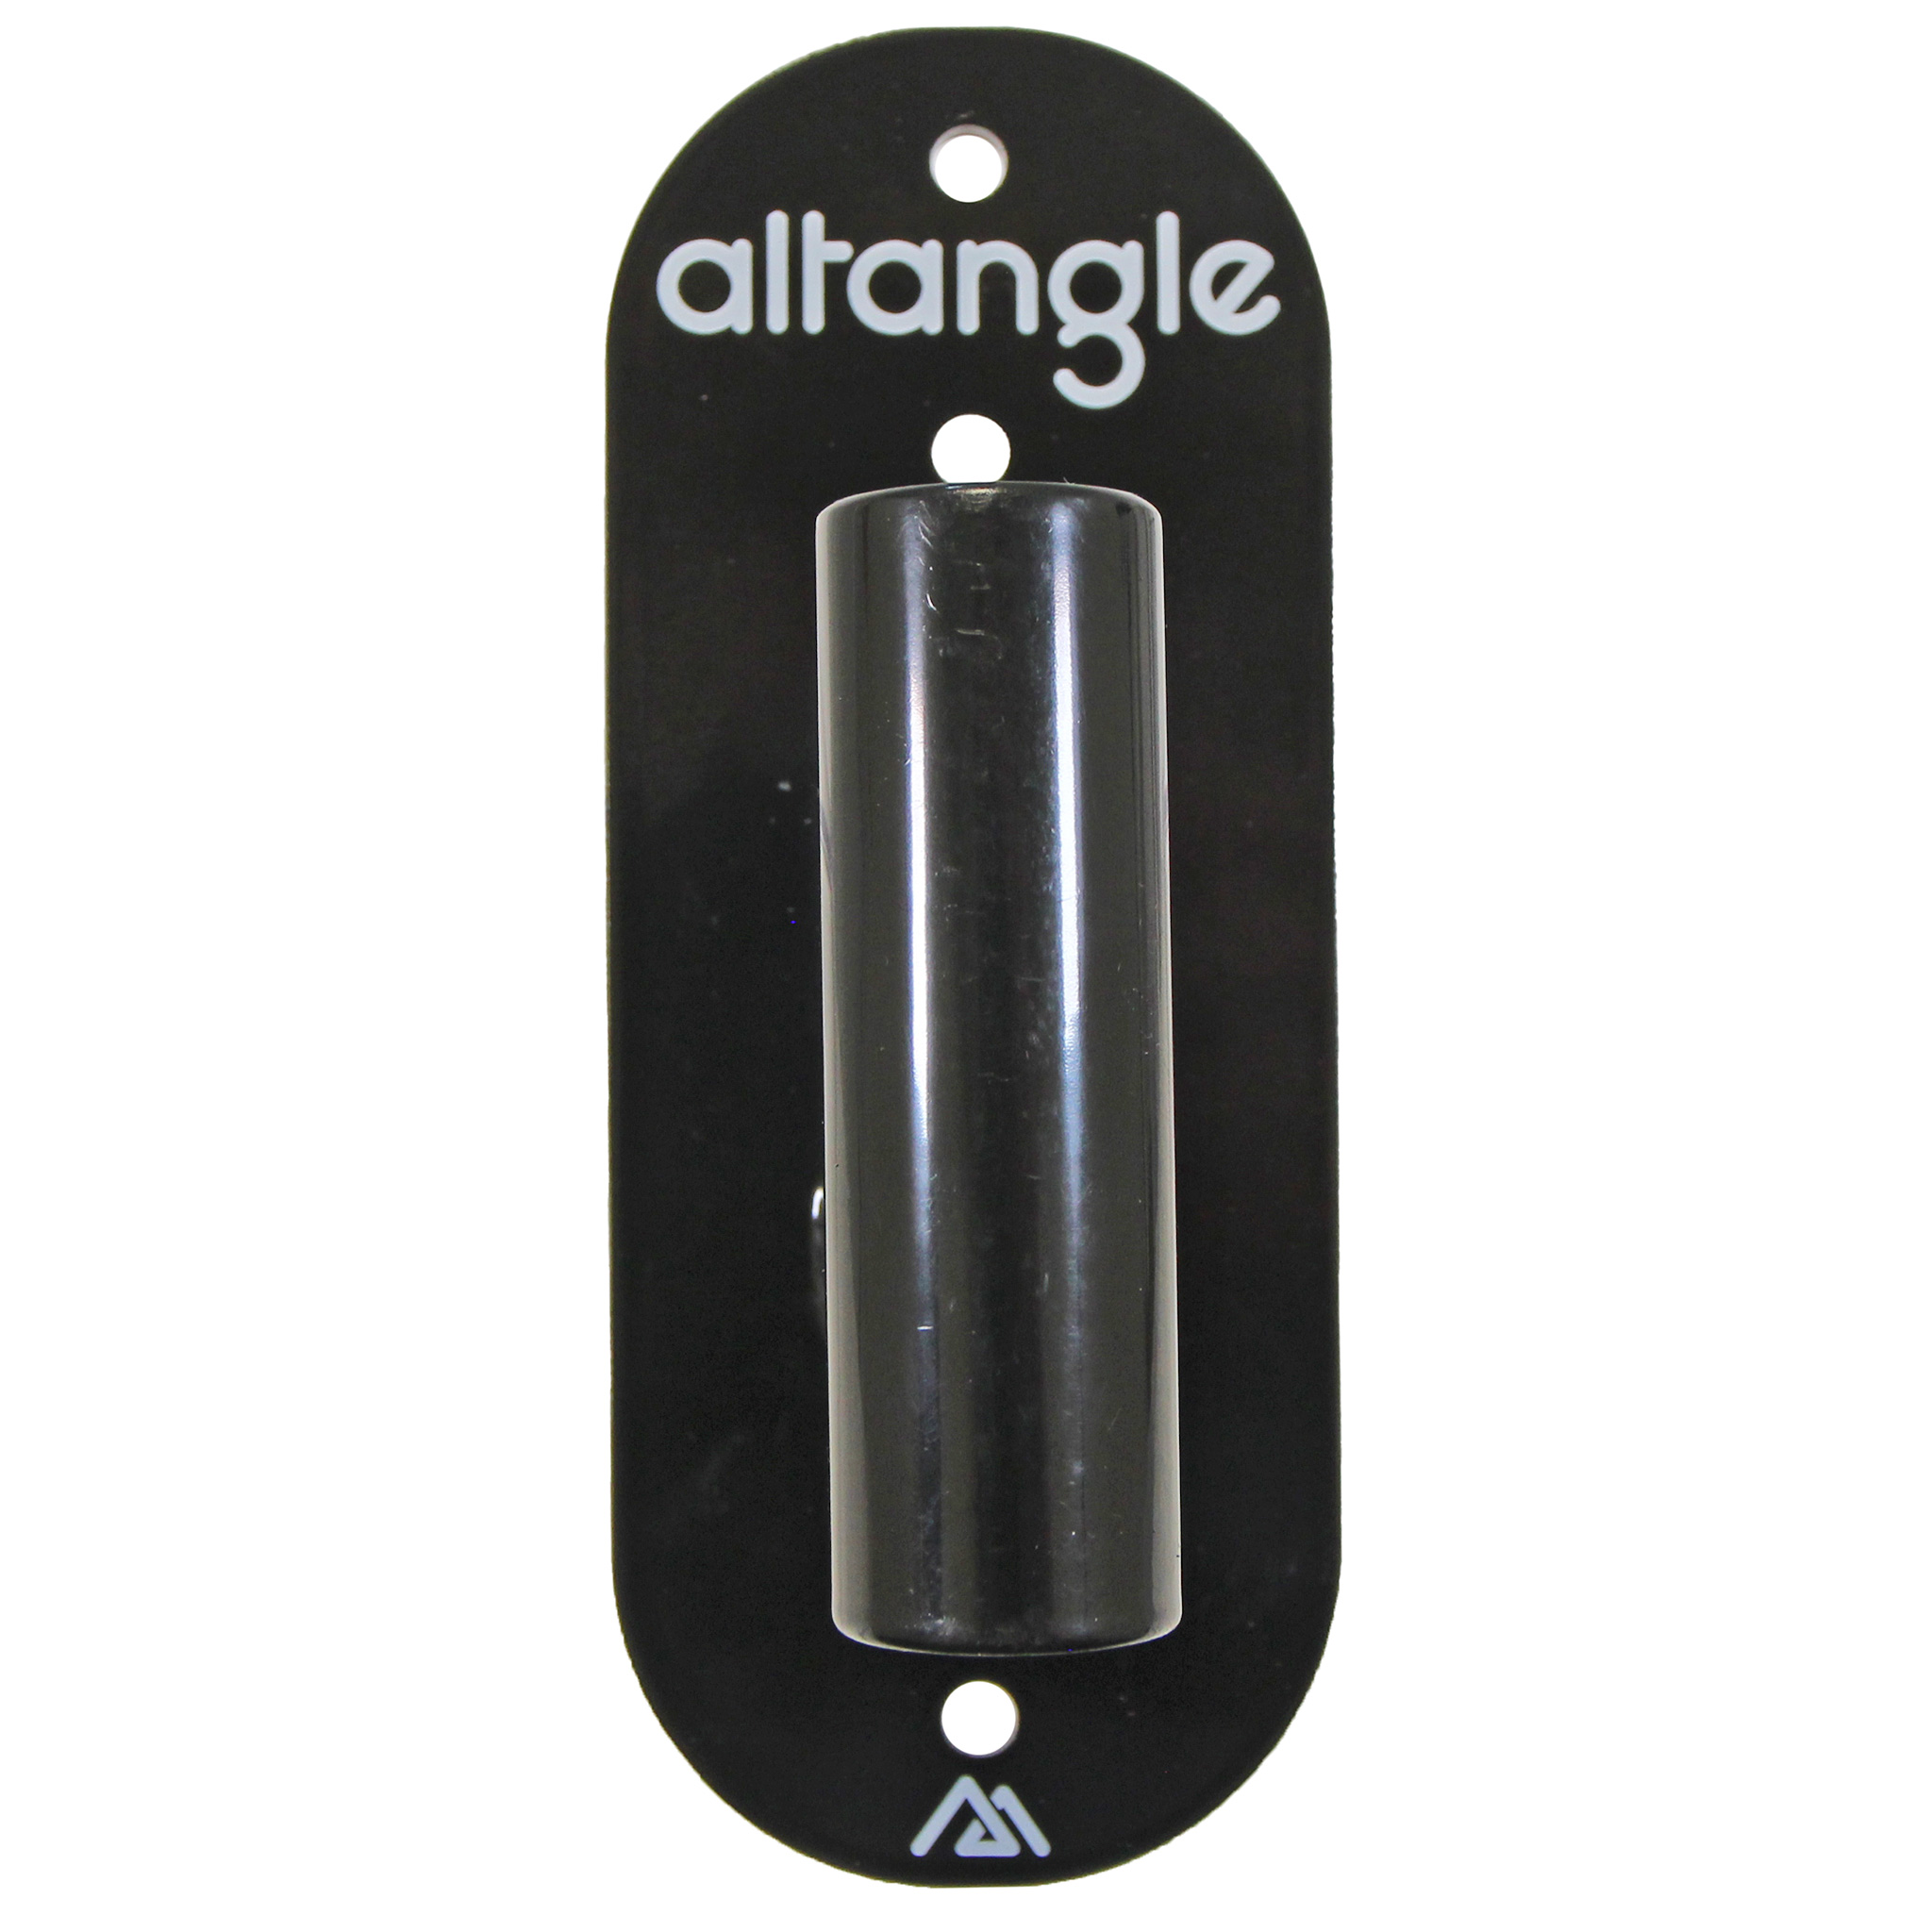 Altangle Home Base for Hangar Connect, Black